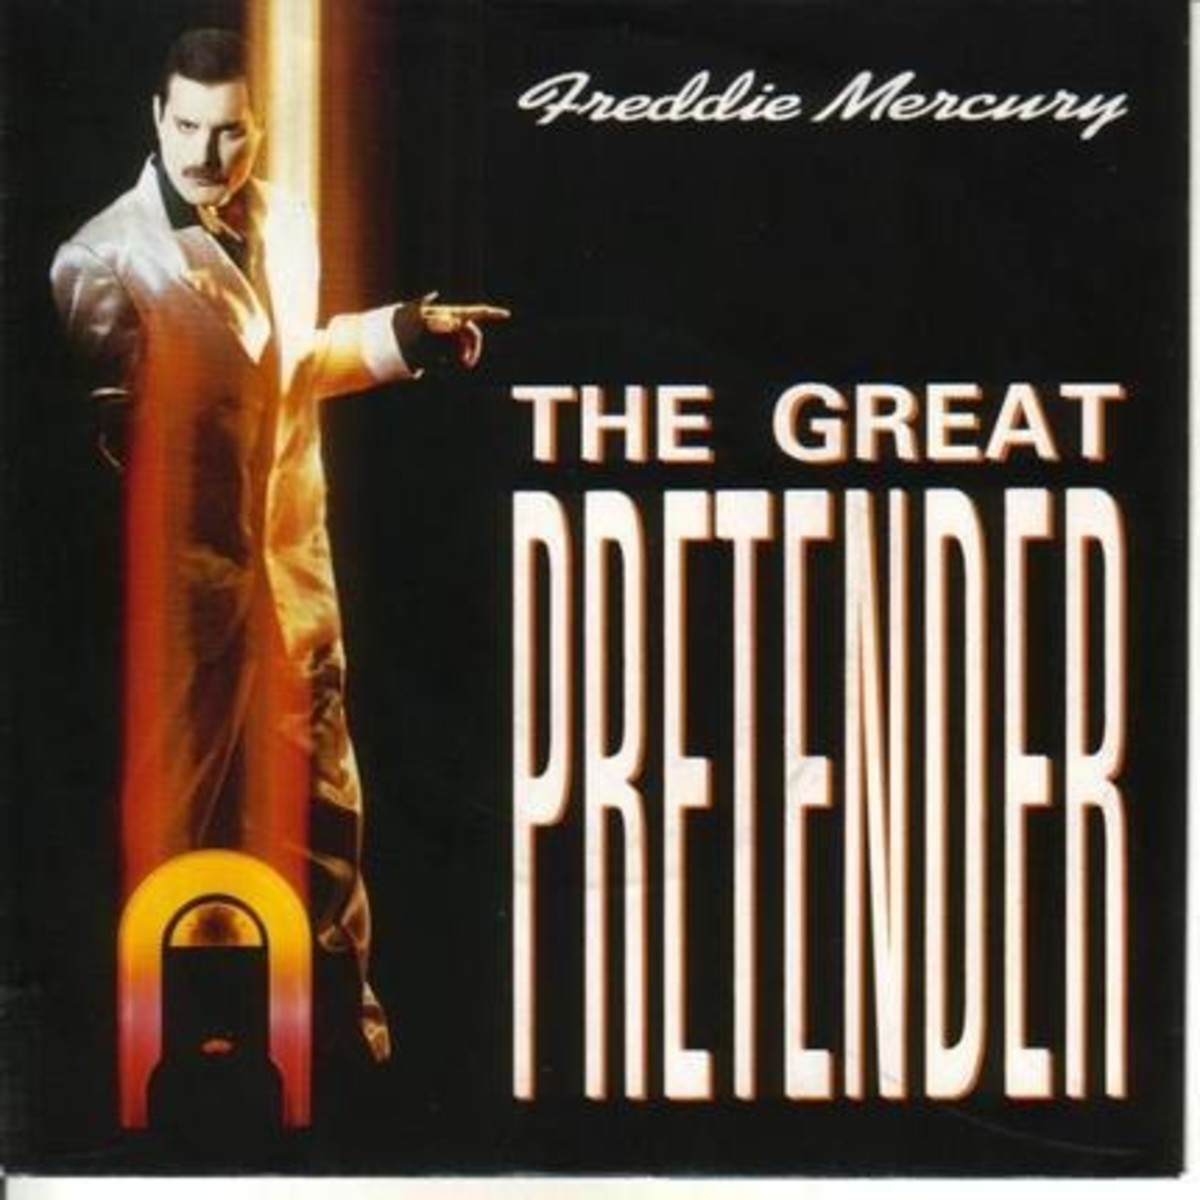 Freddie Mercury's 1987 single was a cover of The Platters' "The Great Pretender."